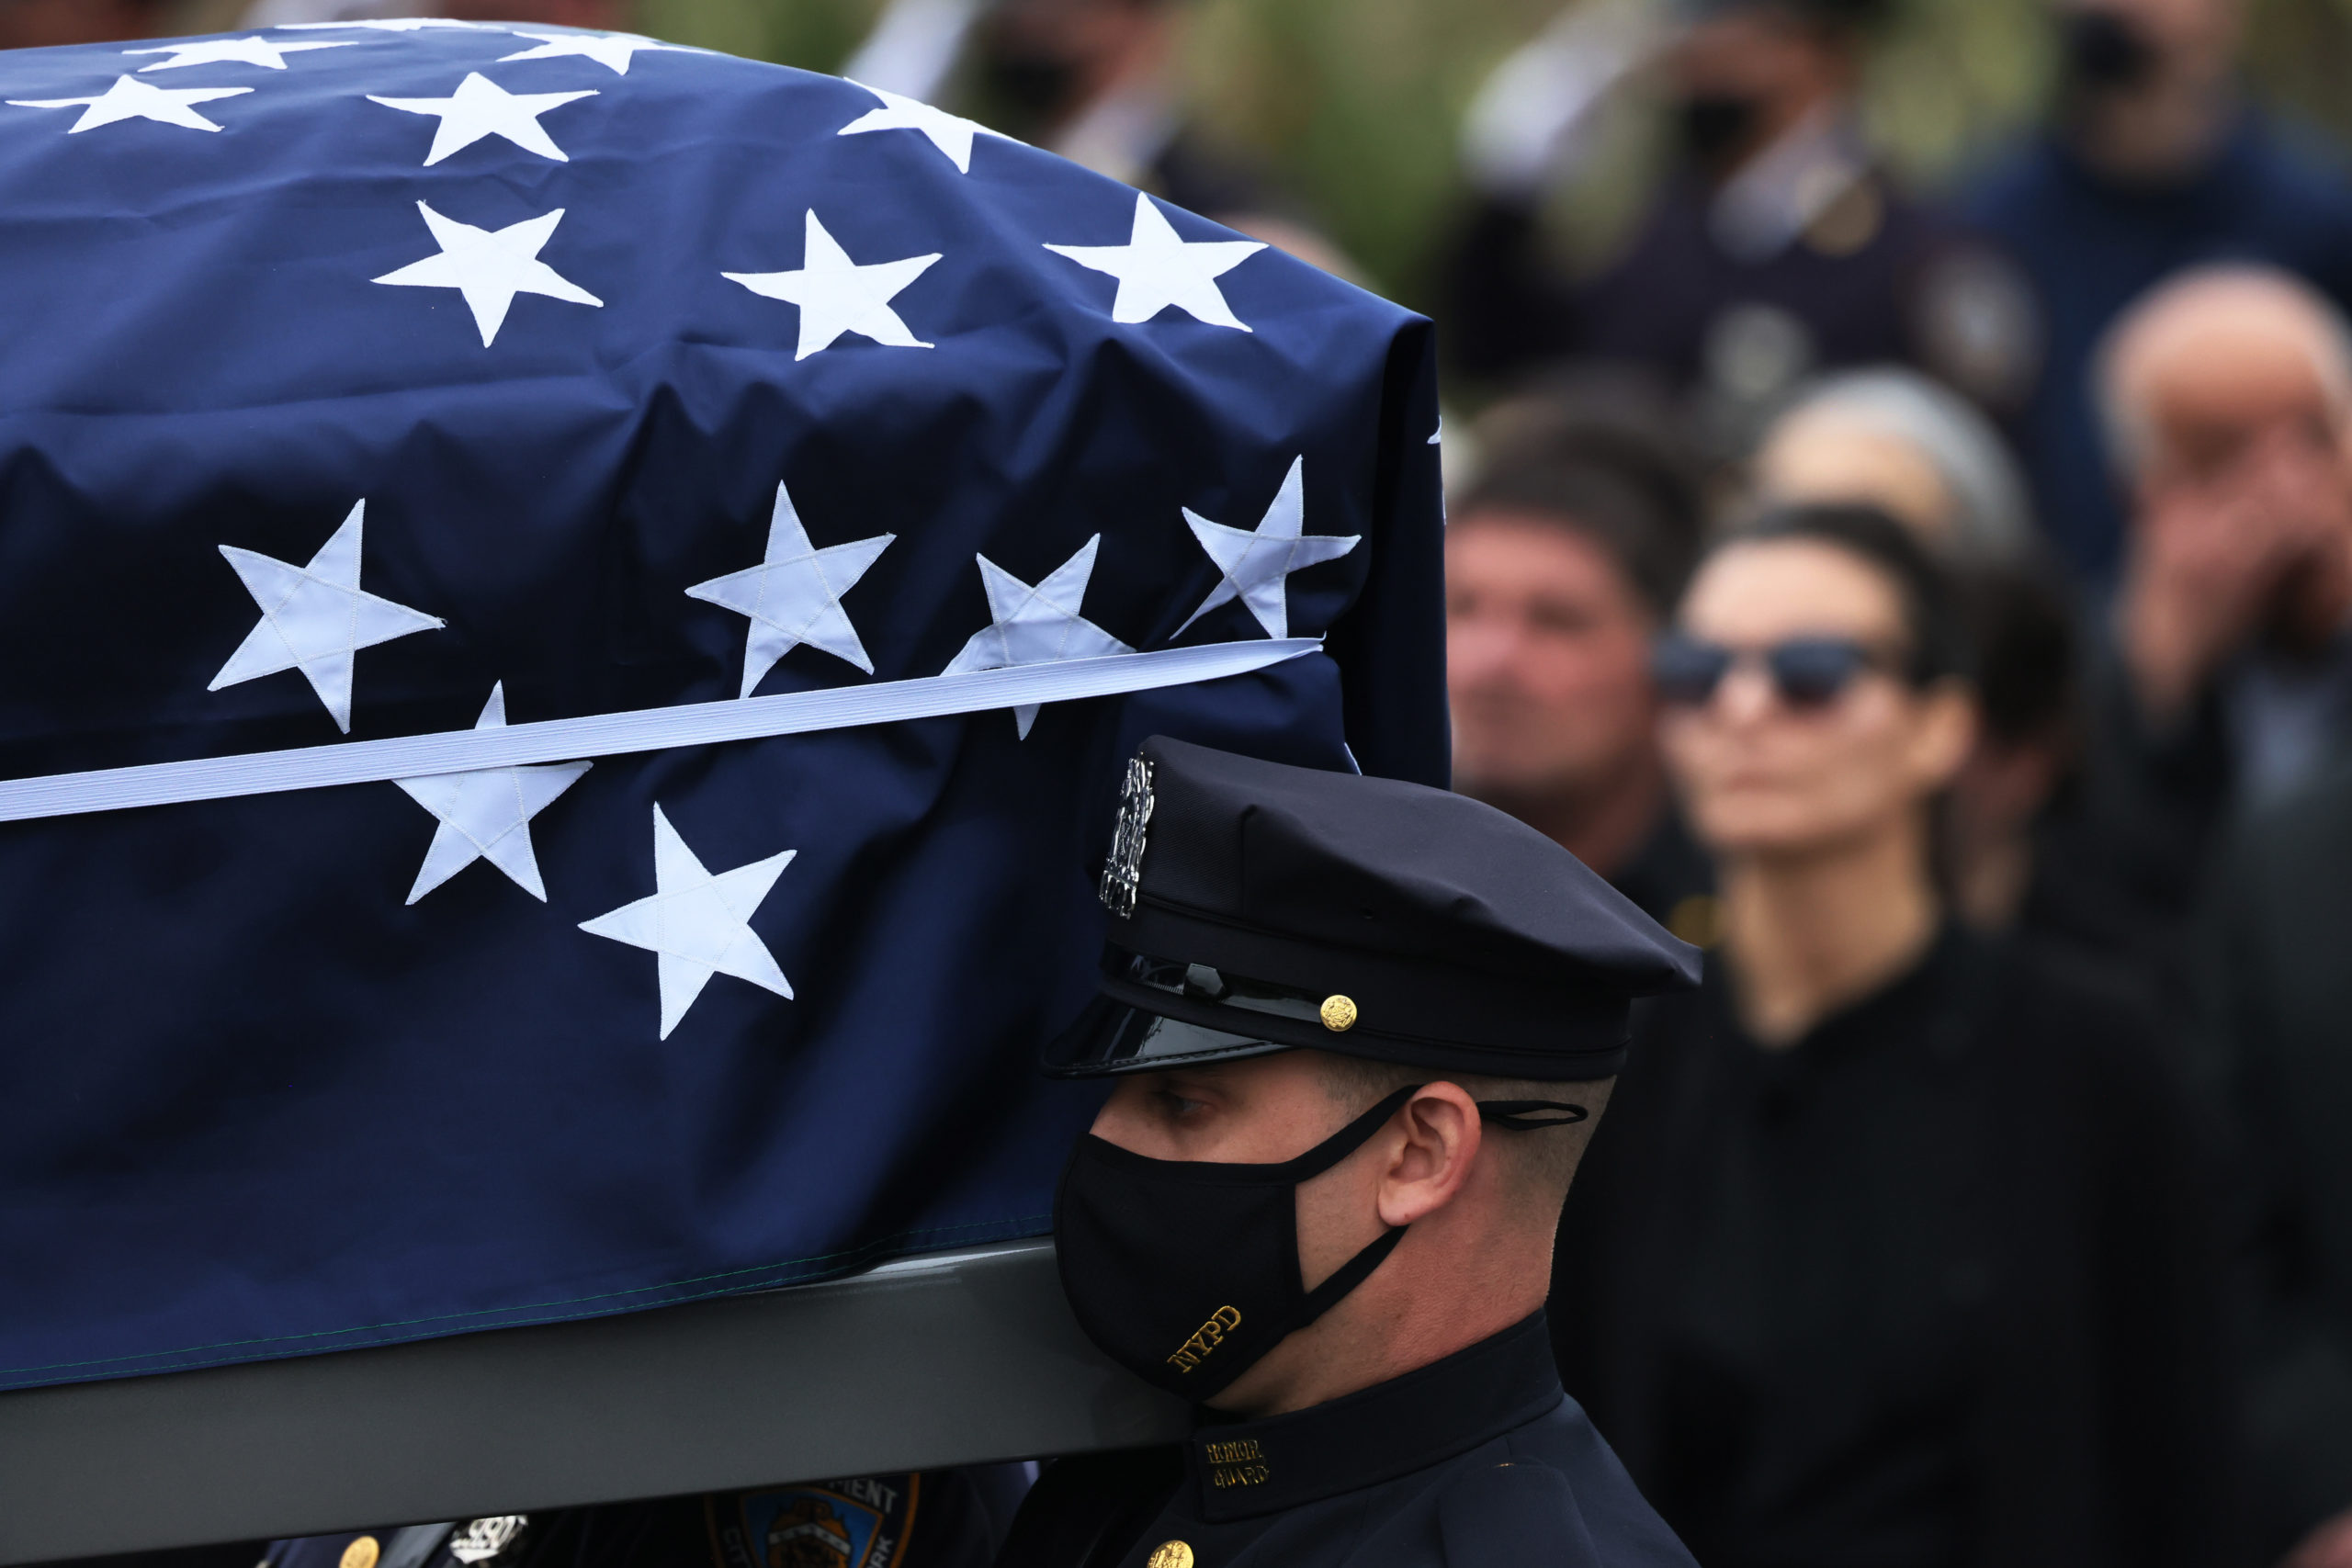 Pallbearers carry the casket of NYPD Officer Anastasios Tsakos towards a hearse during his funeral service at St. Paraskevi Greek Orthodox Shrine Church on May 04, 2021 in Greenlawn, New York. (Photo by Michael M. Santiago/Getty Images)